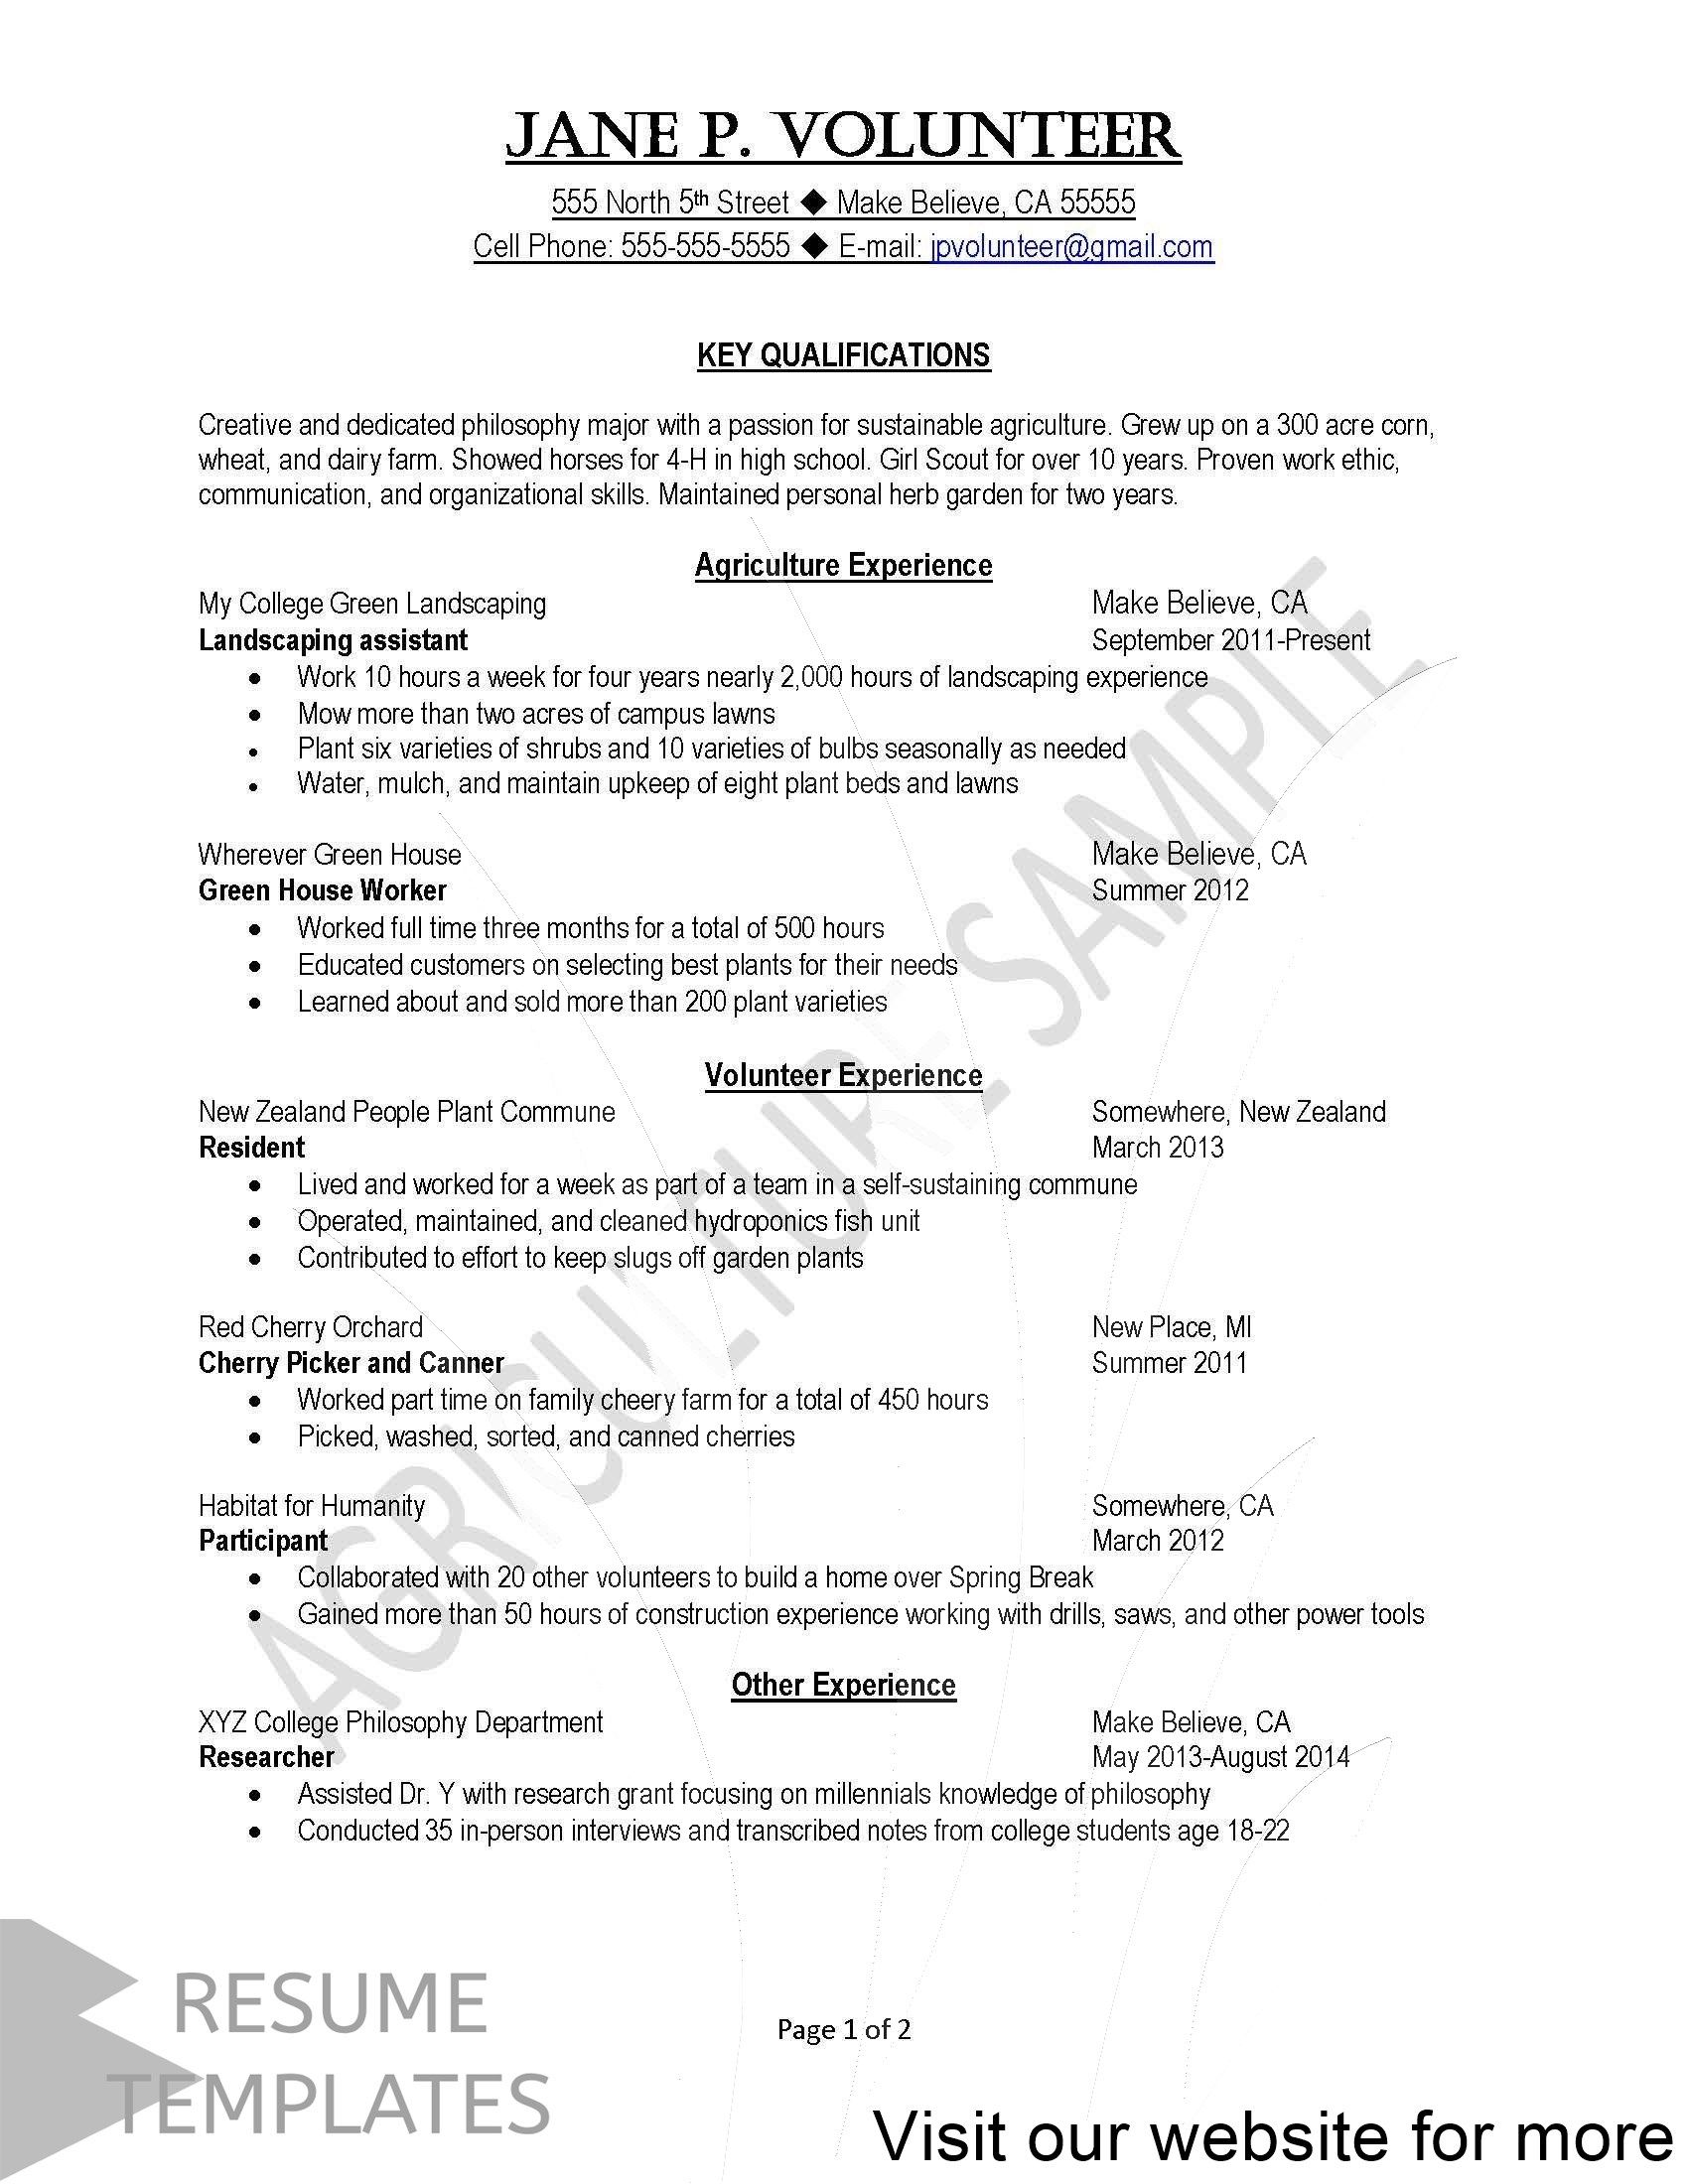 resume template doc download free Professional in 2020 ...